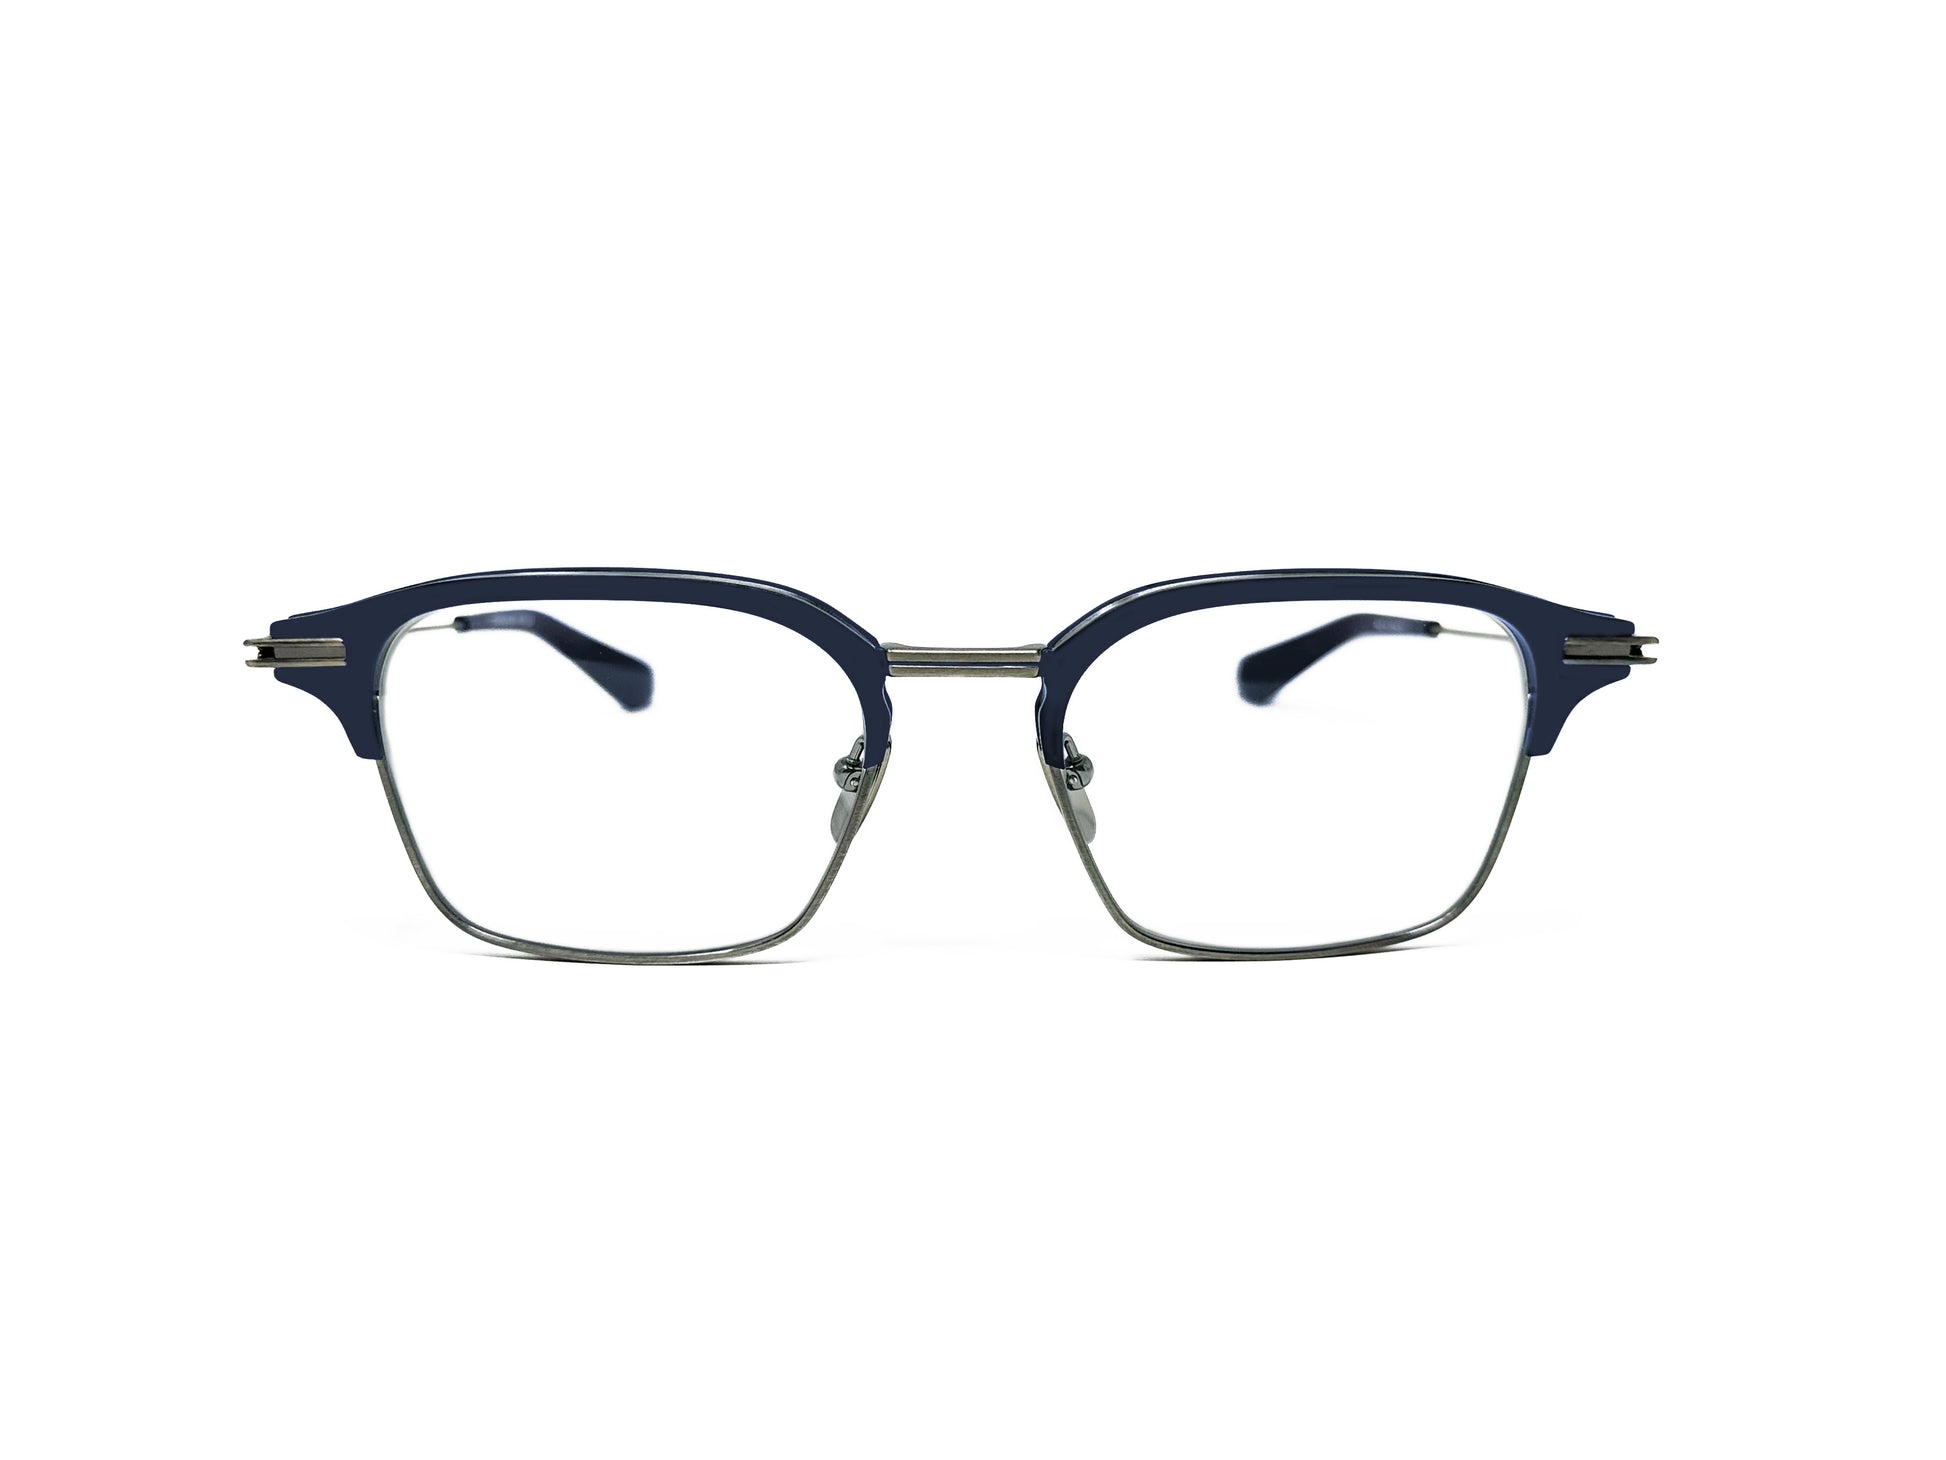 Dita Eyewear metal, half-rim, clubmaster style, optical frame. Model: Typographer. Color: 03 - Matte Navy and Antique Silver. Front view. 